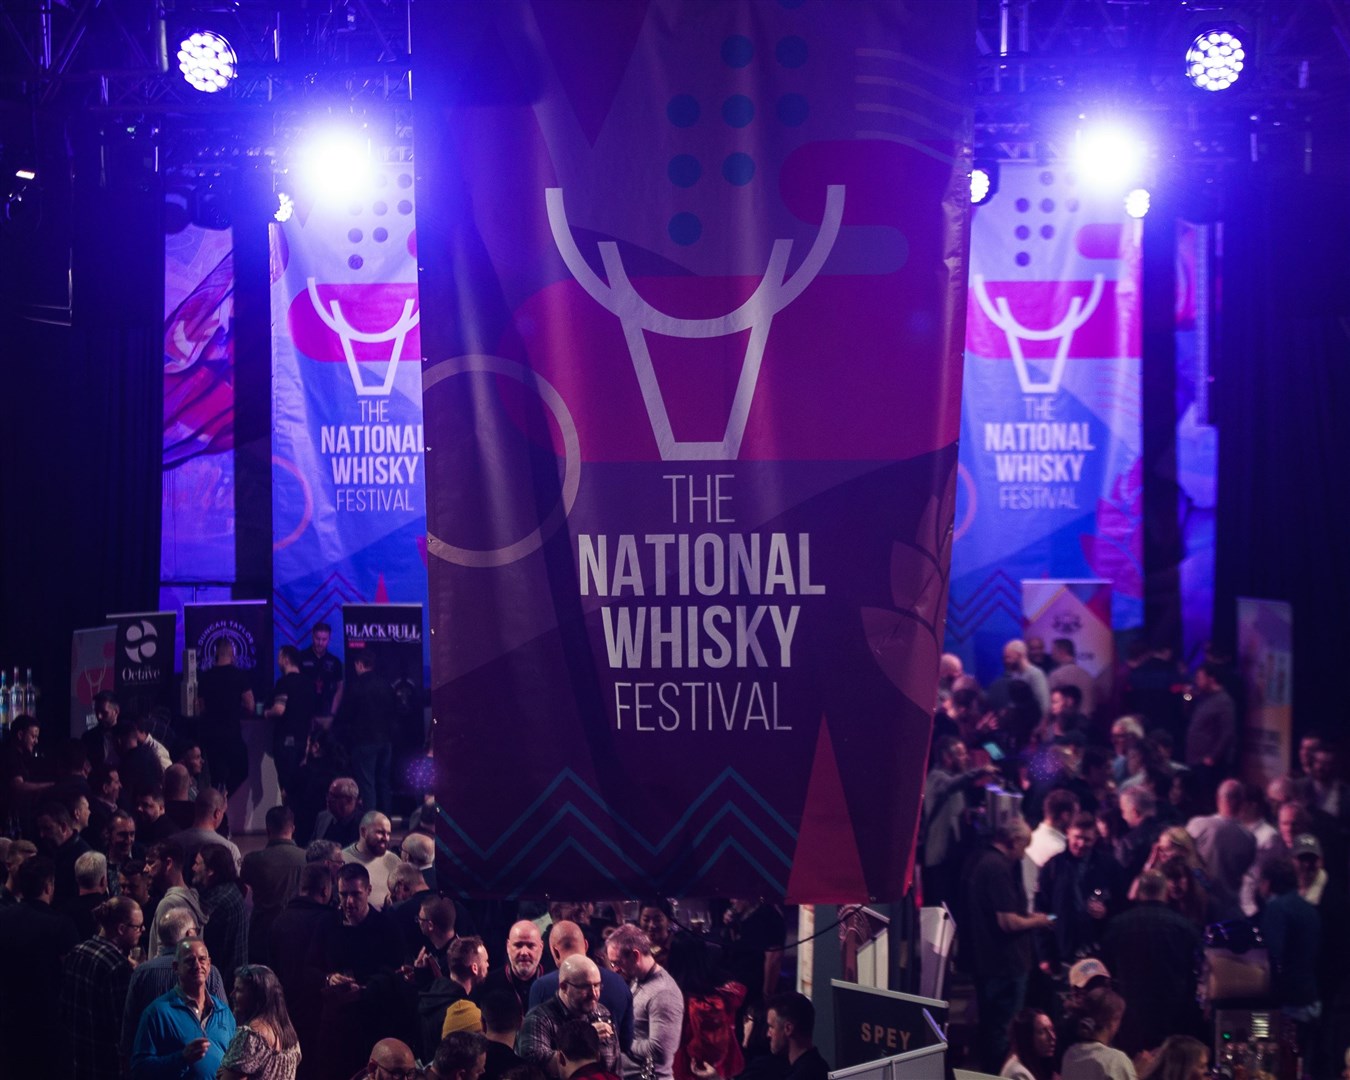 National Whisky Festival in Glasgow. Picture by: Finlay Macintosh.